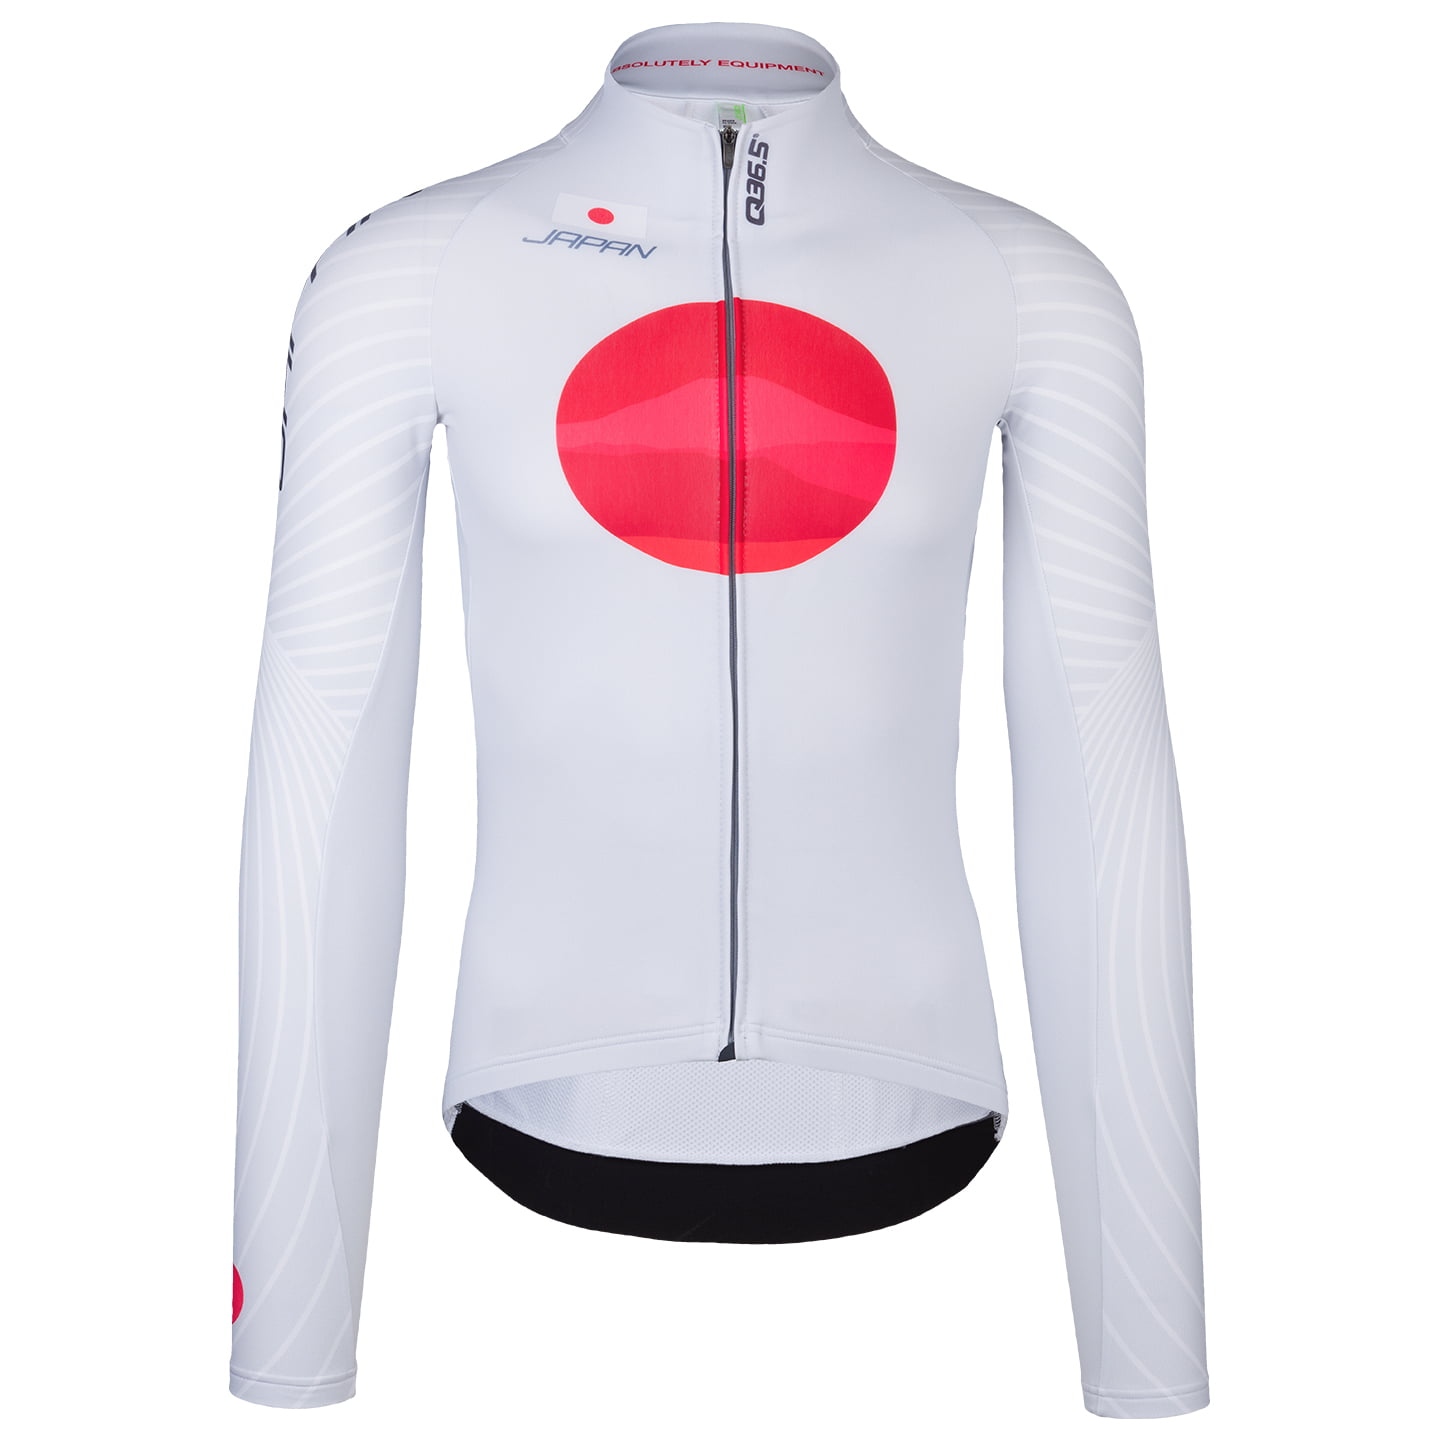 JAPANESE NATIONAL 2024 Long Sleeve Jersey, for men, size 2XL, Cycle shirt, Bike gear